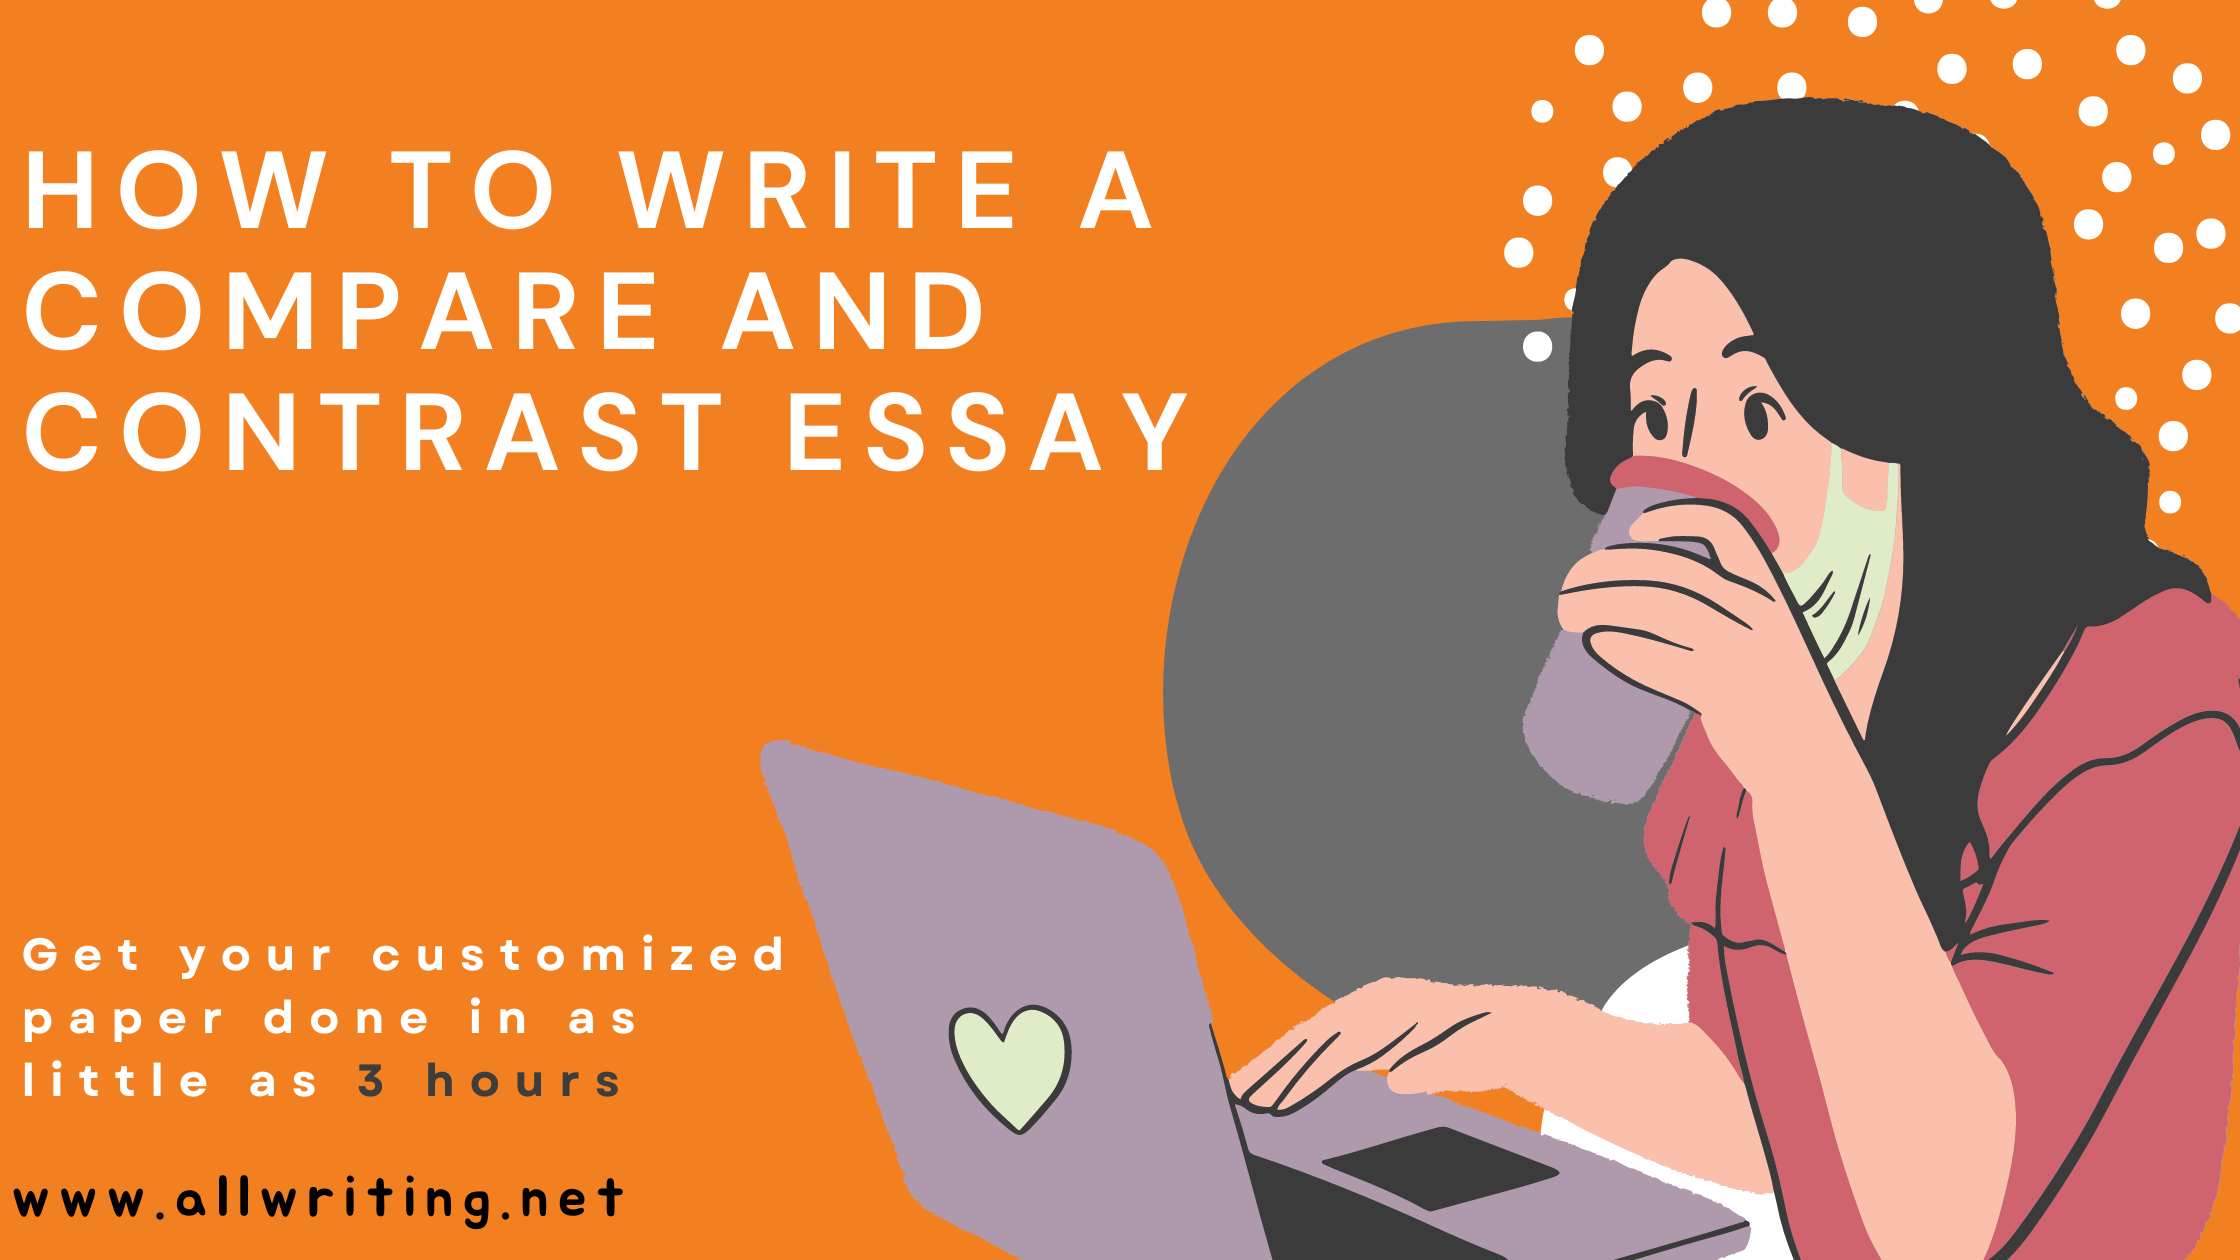 How to Write a Compare and Contrast Essay